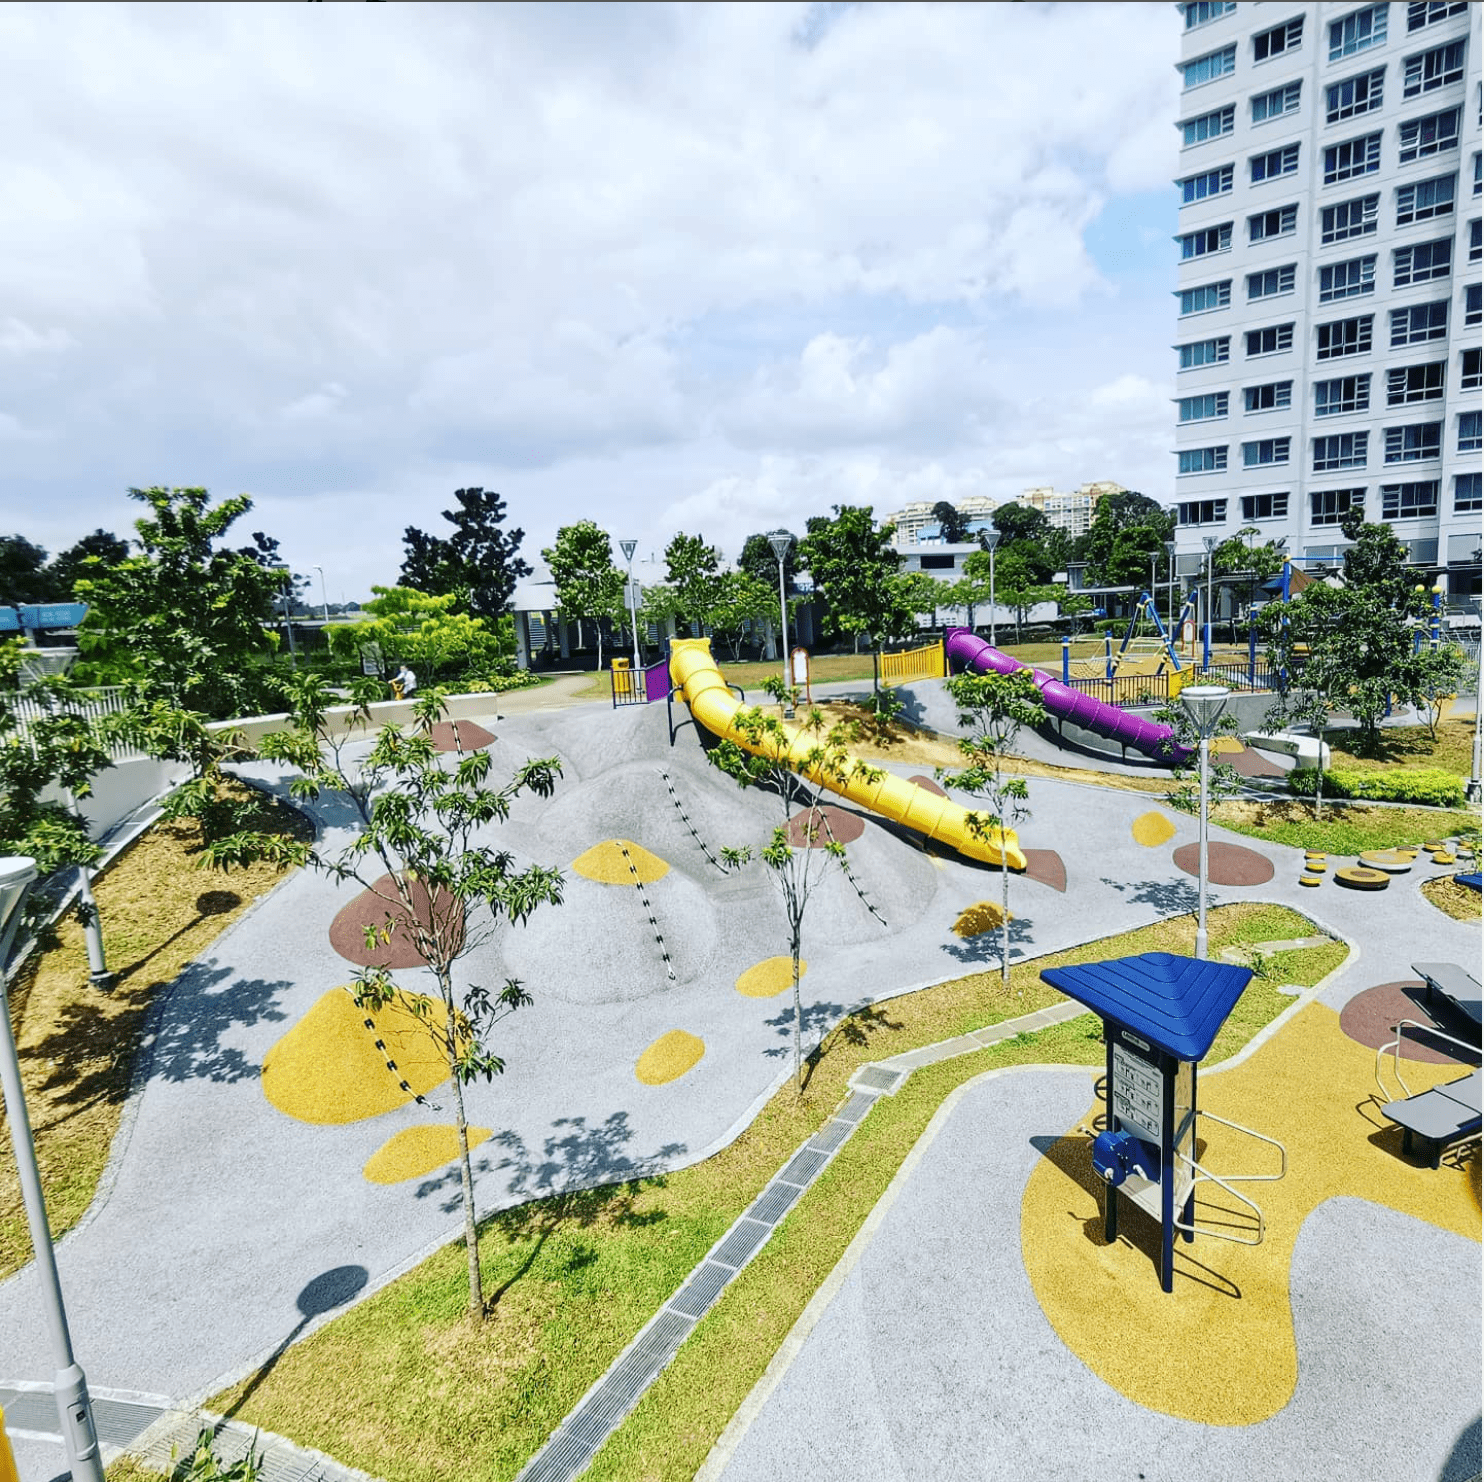 Free playgrounds in Singapore - Toa Payoh Crest